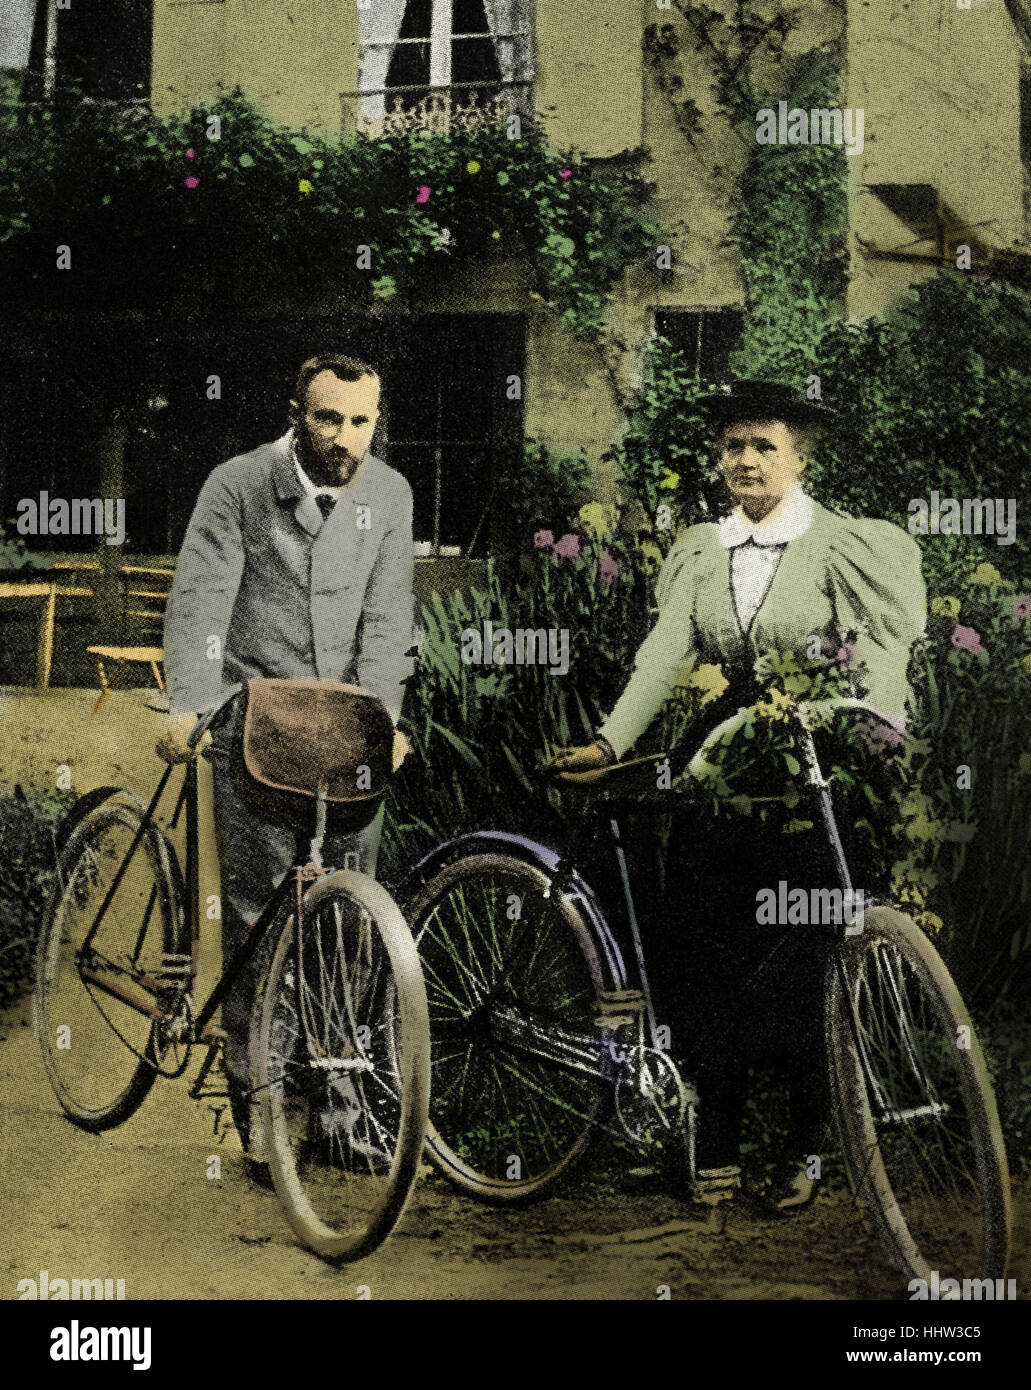 Pierre and Marie Curie with the bicycles on which, during their early married life, the roamed the roads of France together. MC: Polish-born French physicist and pioneer in radioactivity, 7 November 1867 – 4 July 1934. PC: French physicist and pioneer in radioactivity, 15 May 1859 – 19 April 1906. Stock Photo